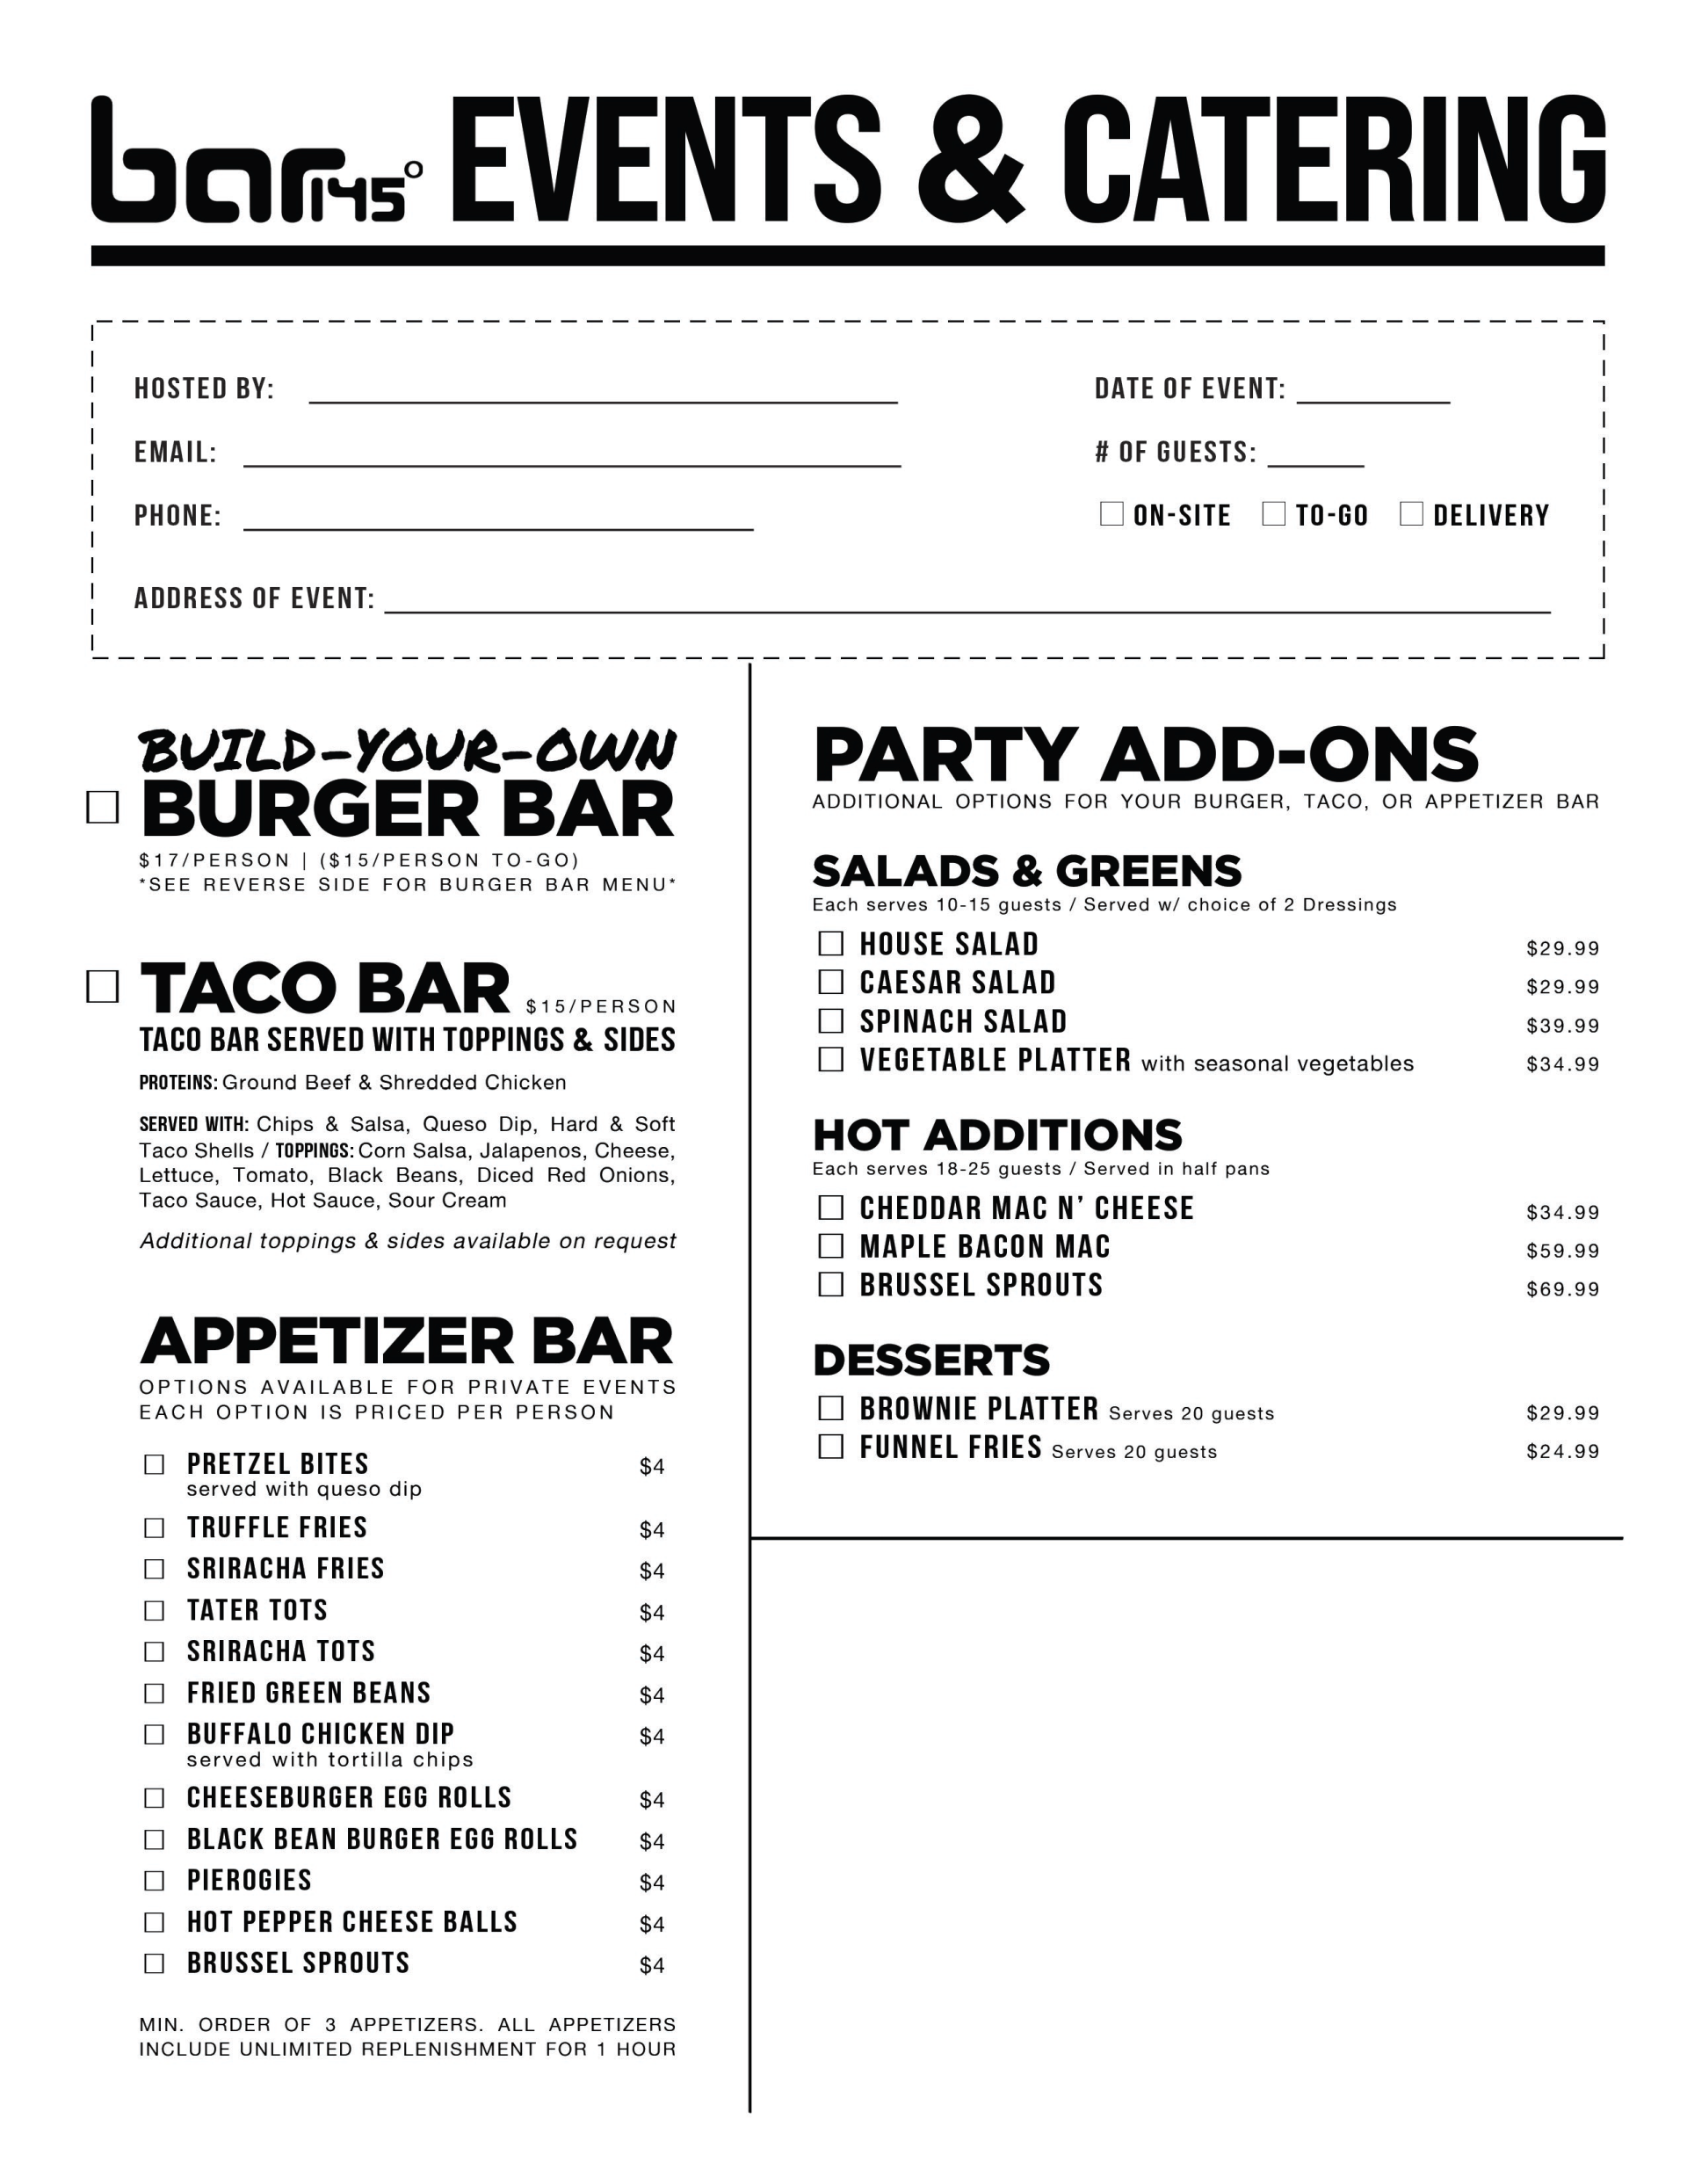 Bar 145 Events and Catering Menu